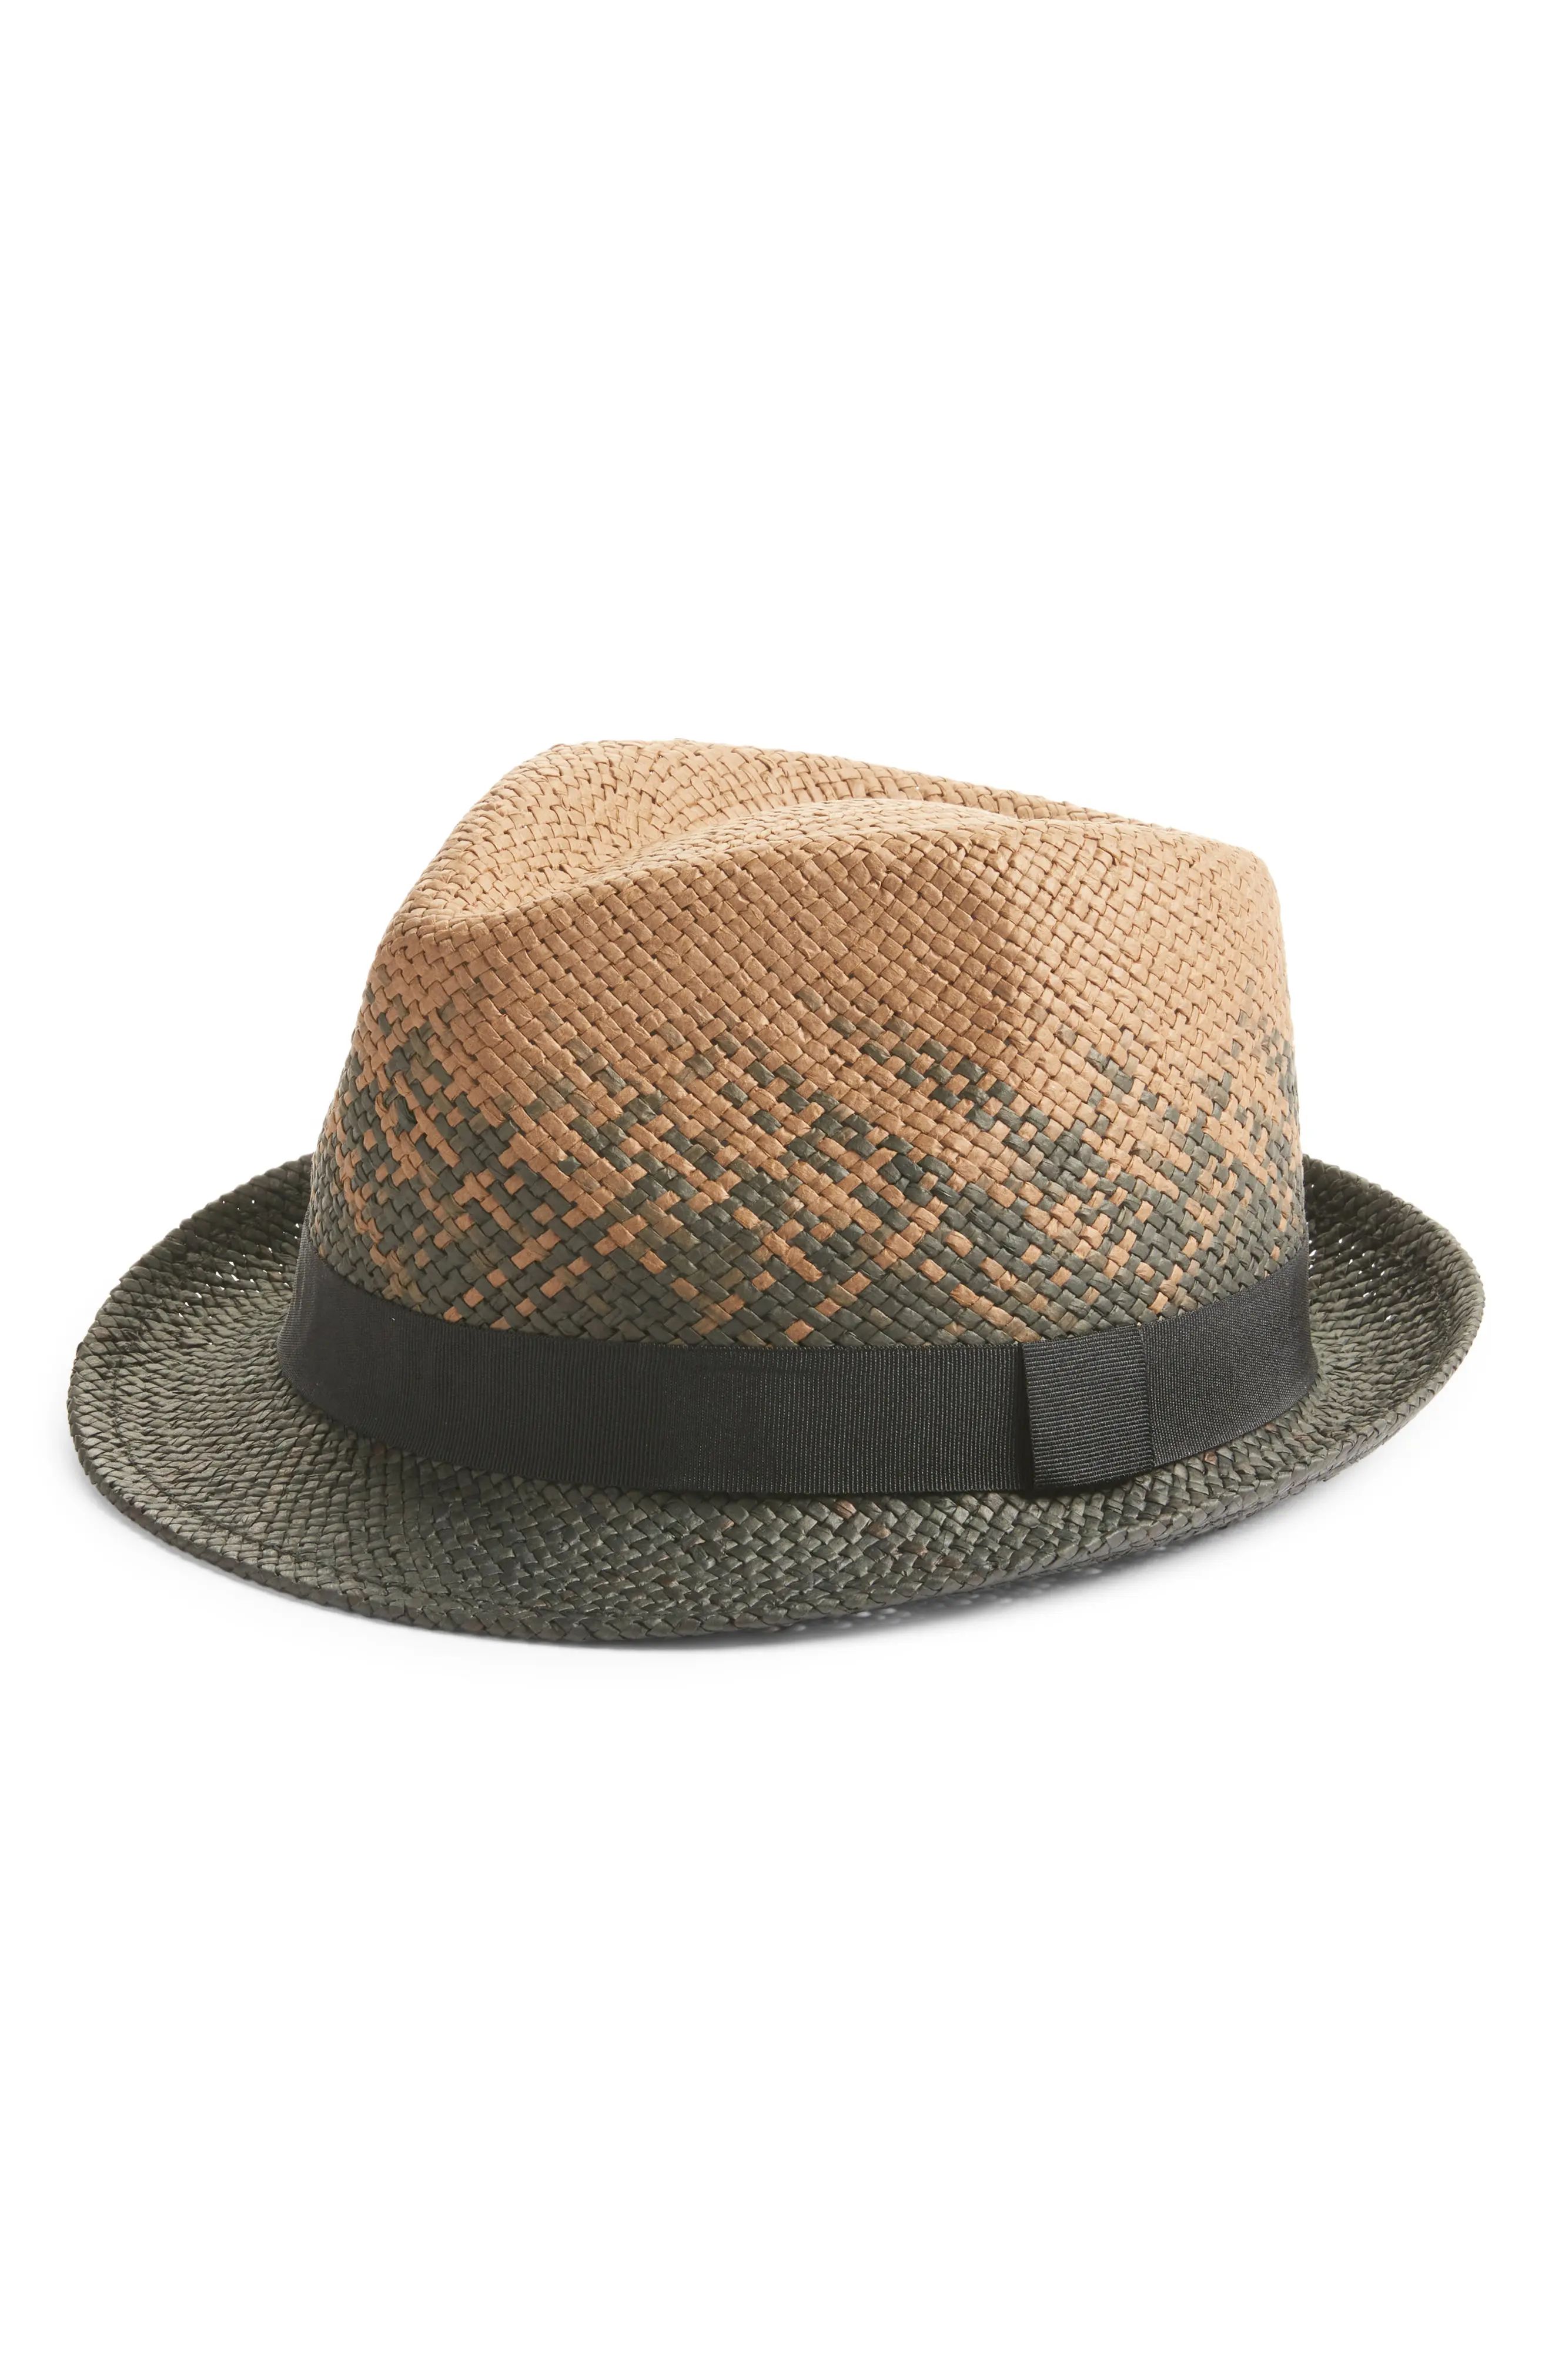 Nordstrom Ombre Bubble Crown Fedora in Black Combo at Nordstrom, Size Small | Nordstrom